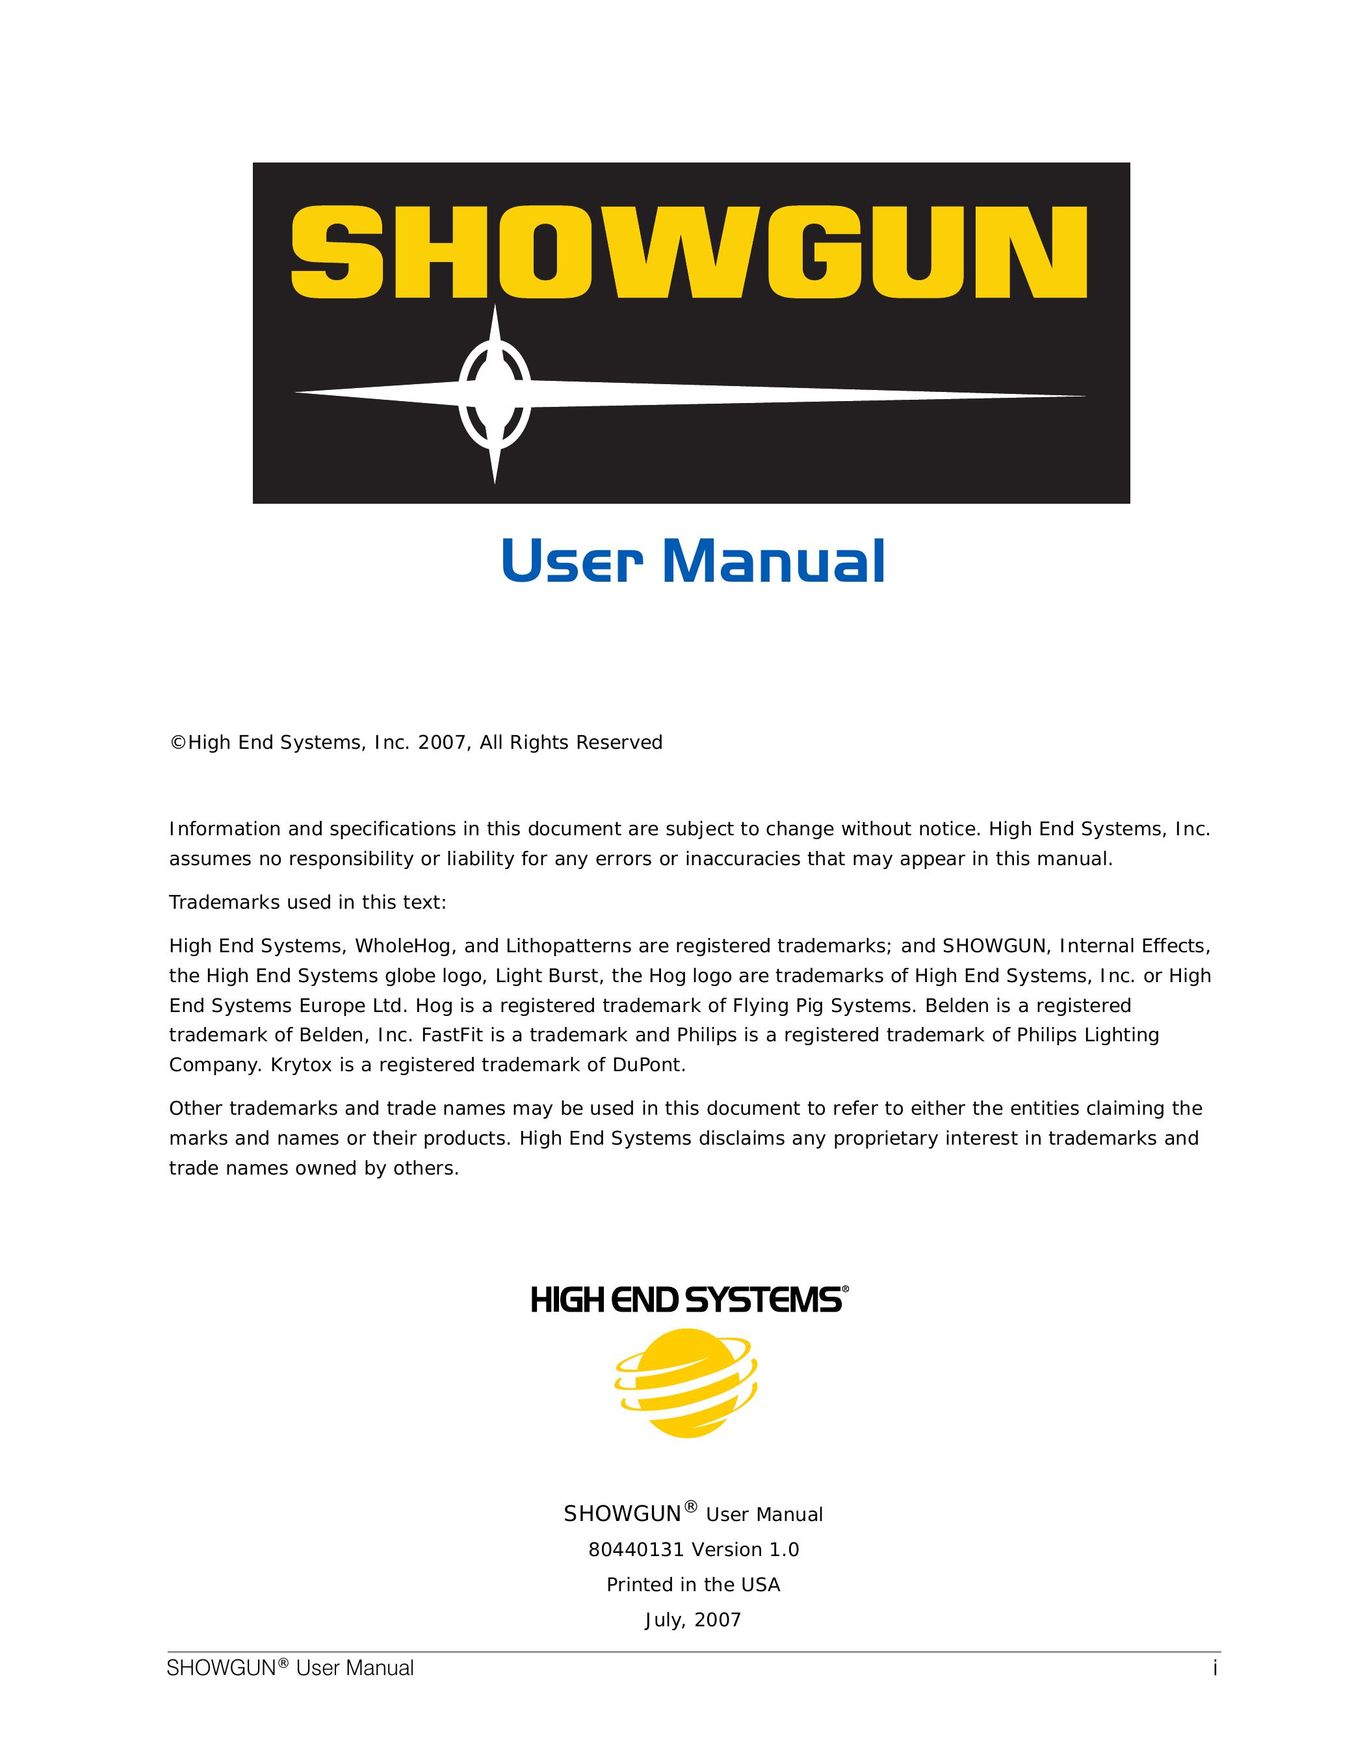 High End Systems SHOWGUN Indoor Furnishings User Manual